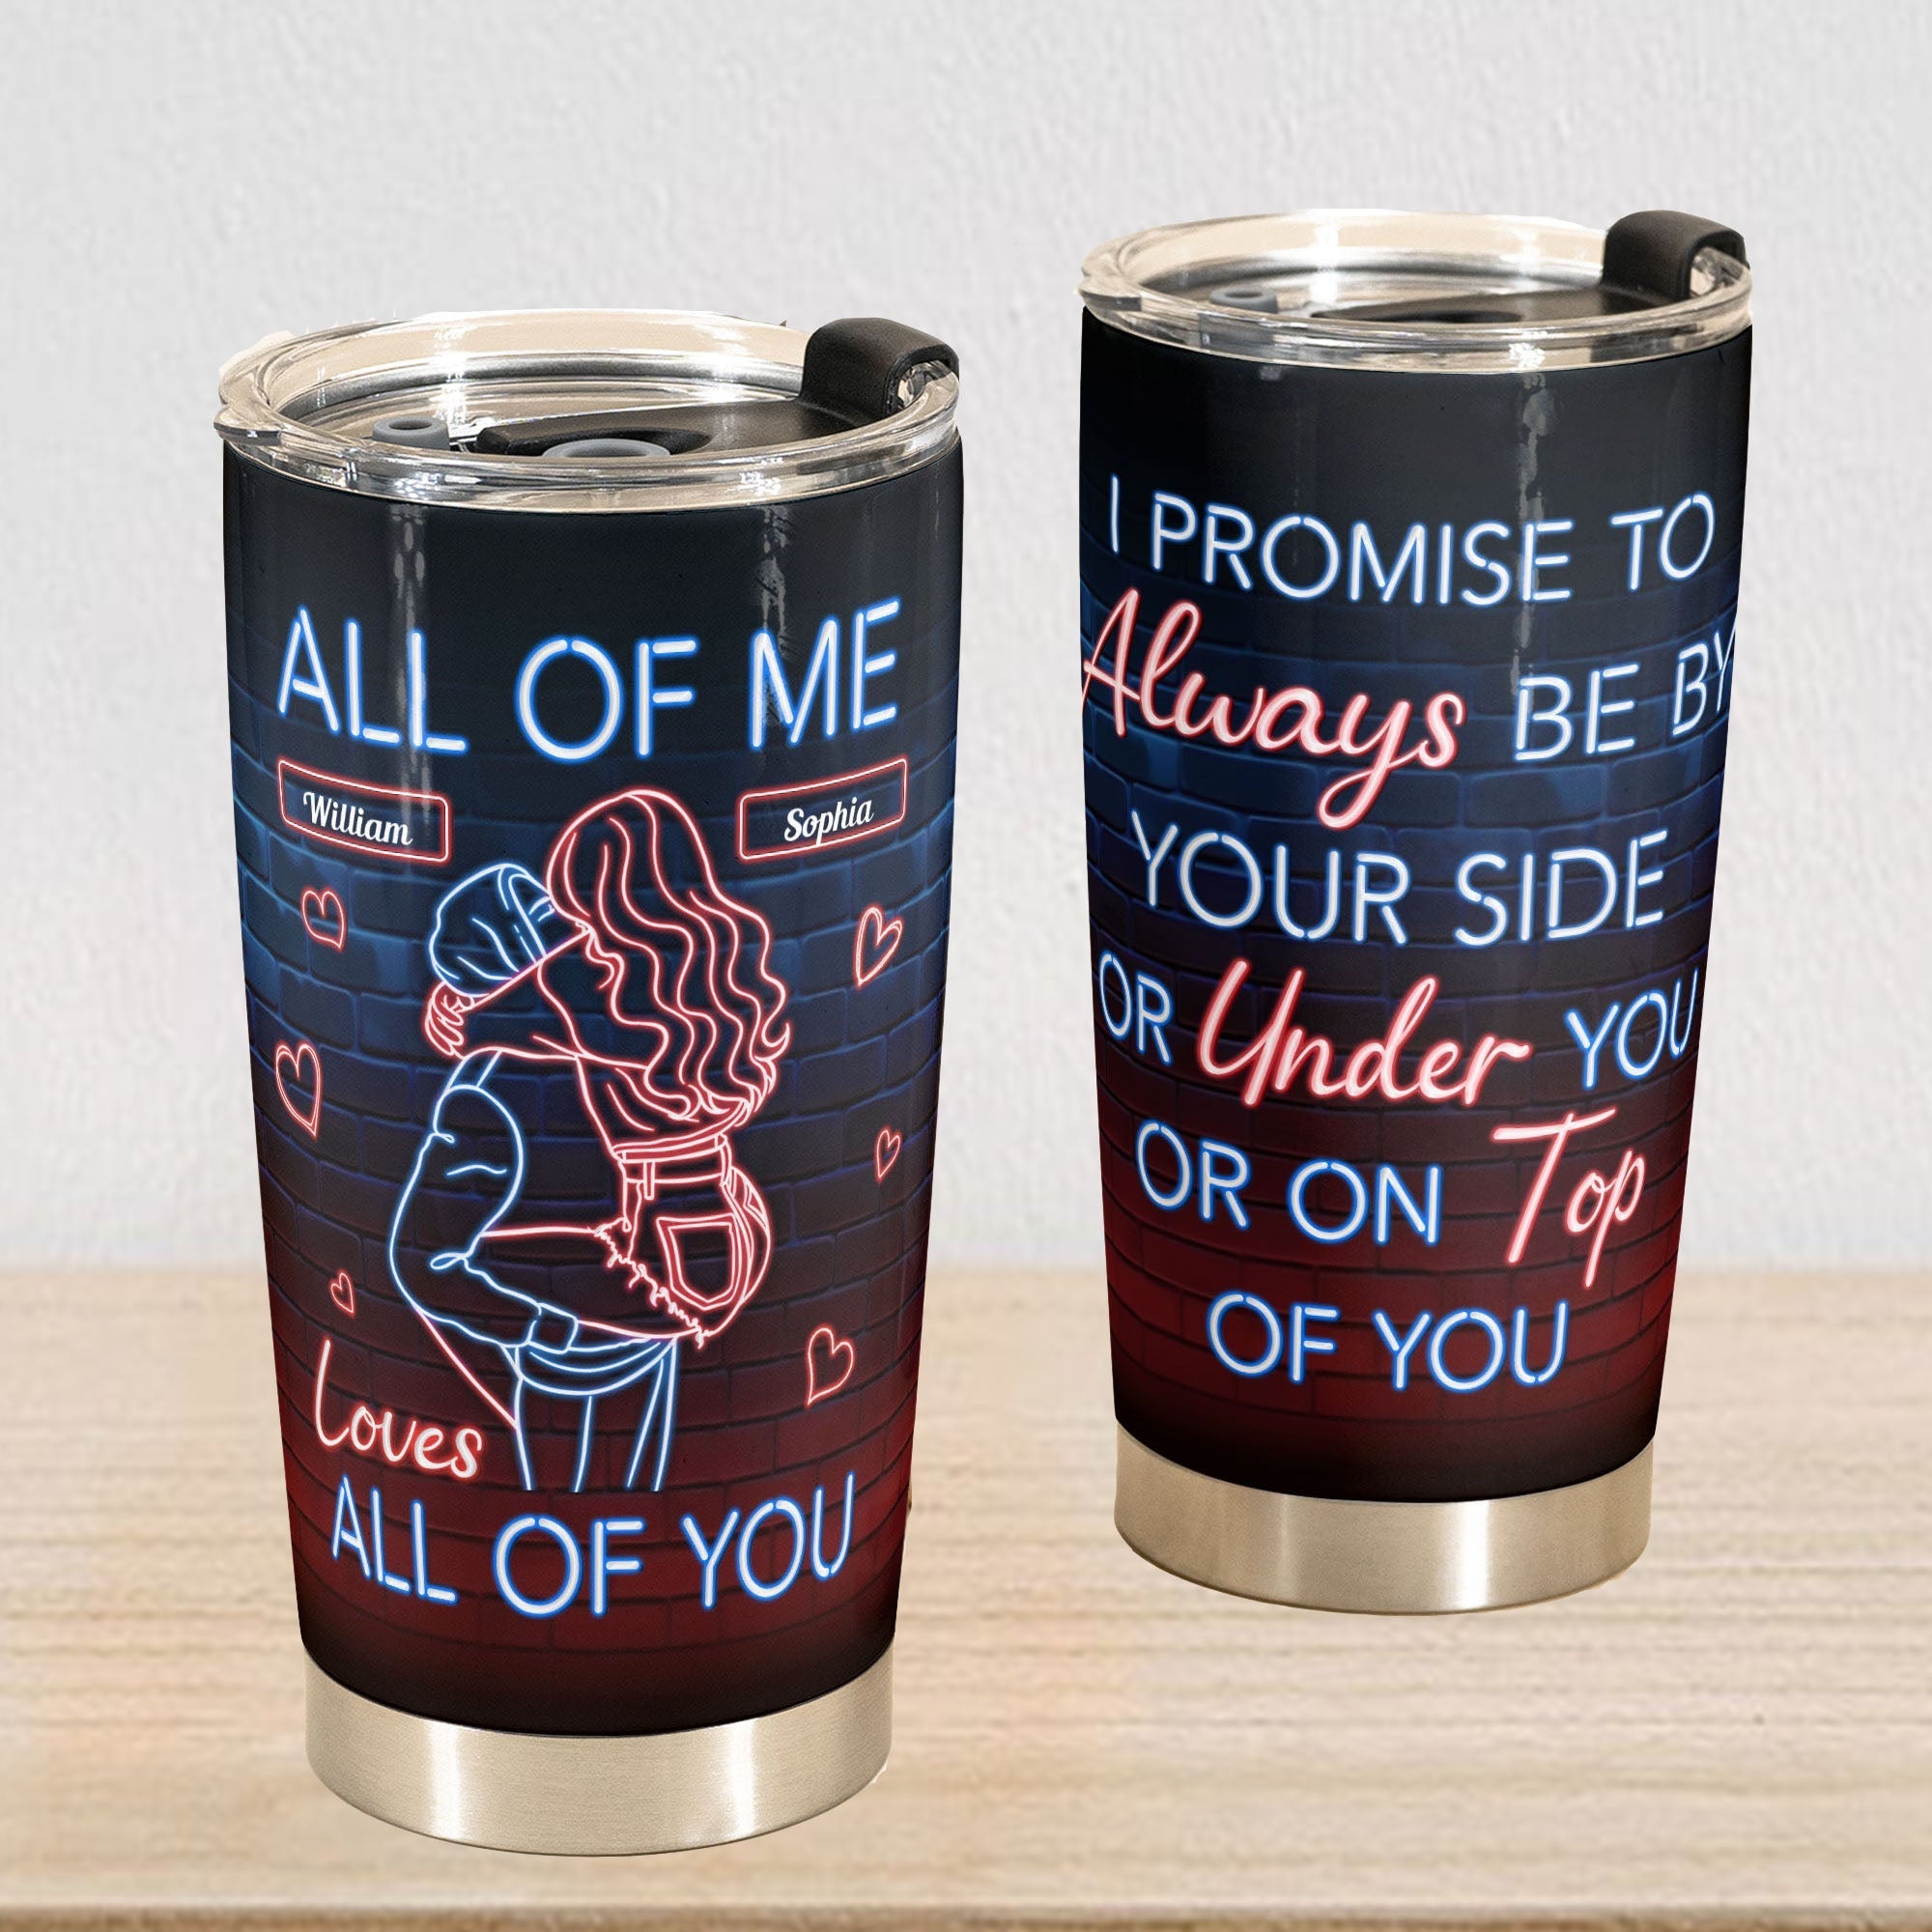 I Promise To Always Be By Your Side - Personalized Tumbler Cup